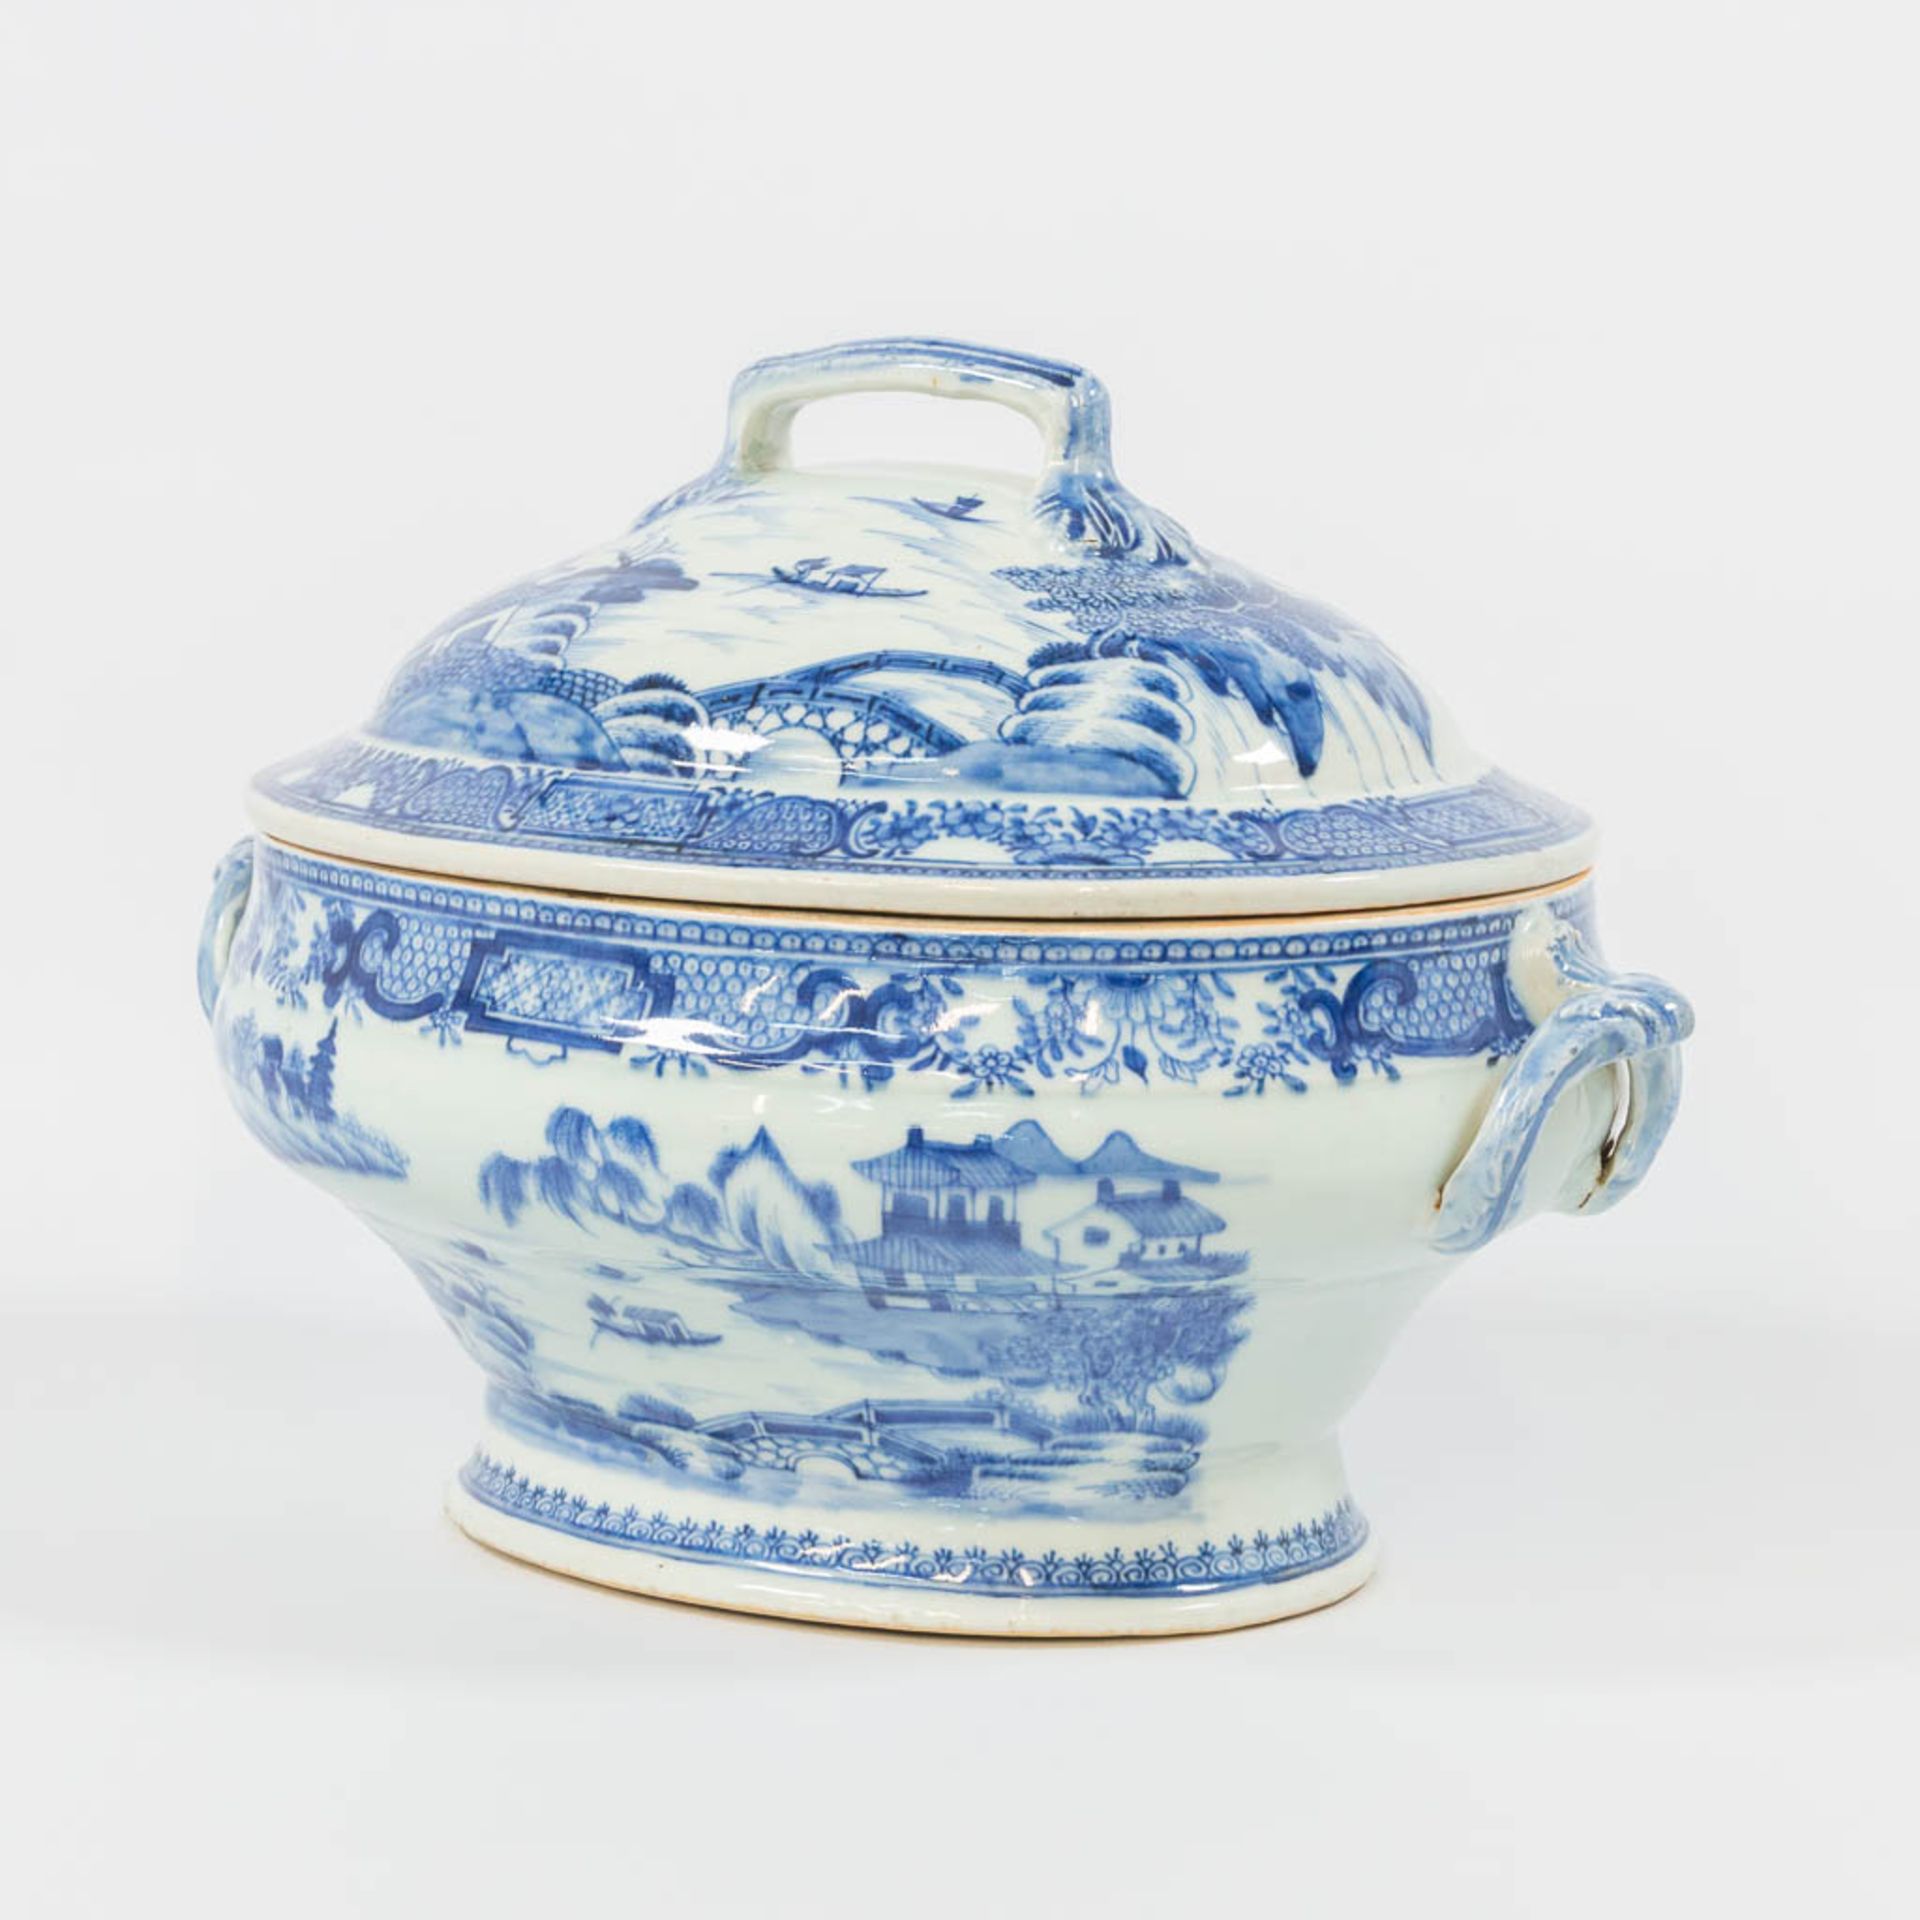 A large Chinese export porcelain blue and white tureen. 19th century. - Image 8 of 17